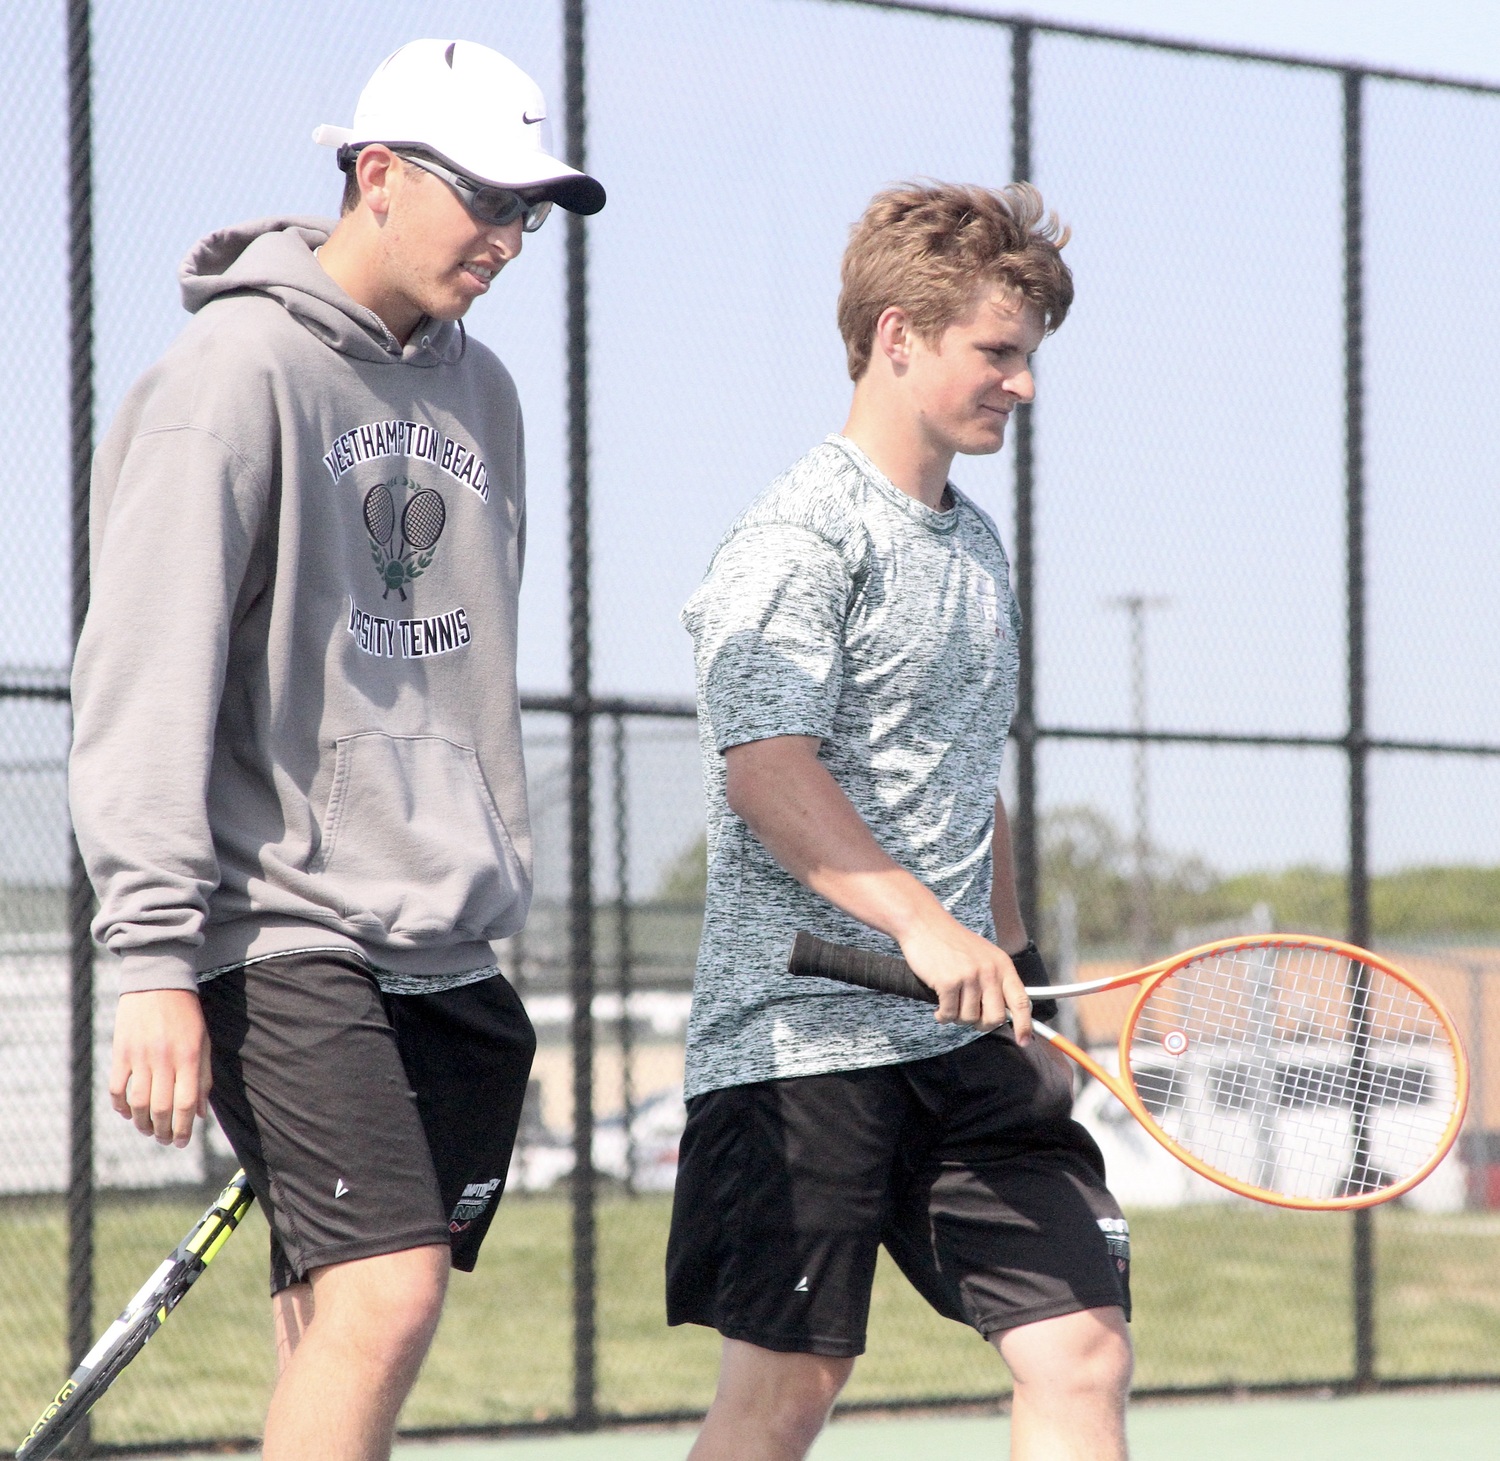 Sophomore Giancarlo Volpe and junior Bobby Stabile celebrate their Division IV doubles championship win. DESIRÉE KEEGAN